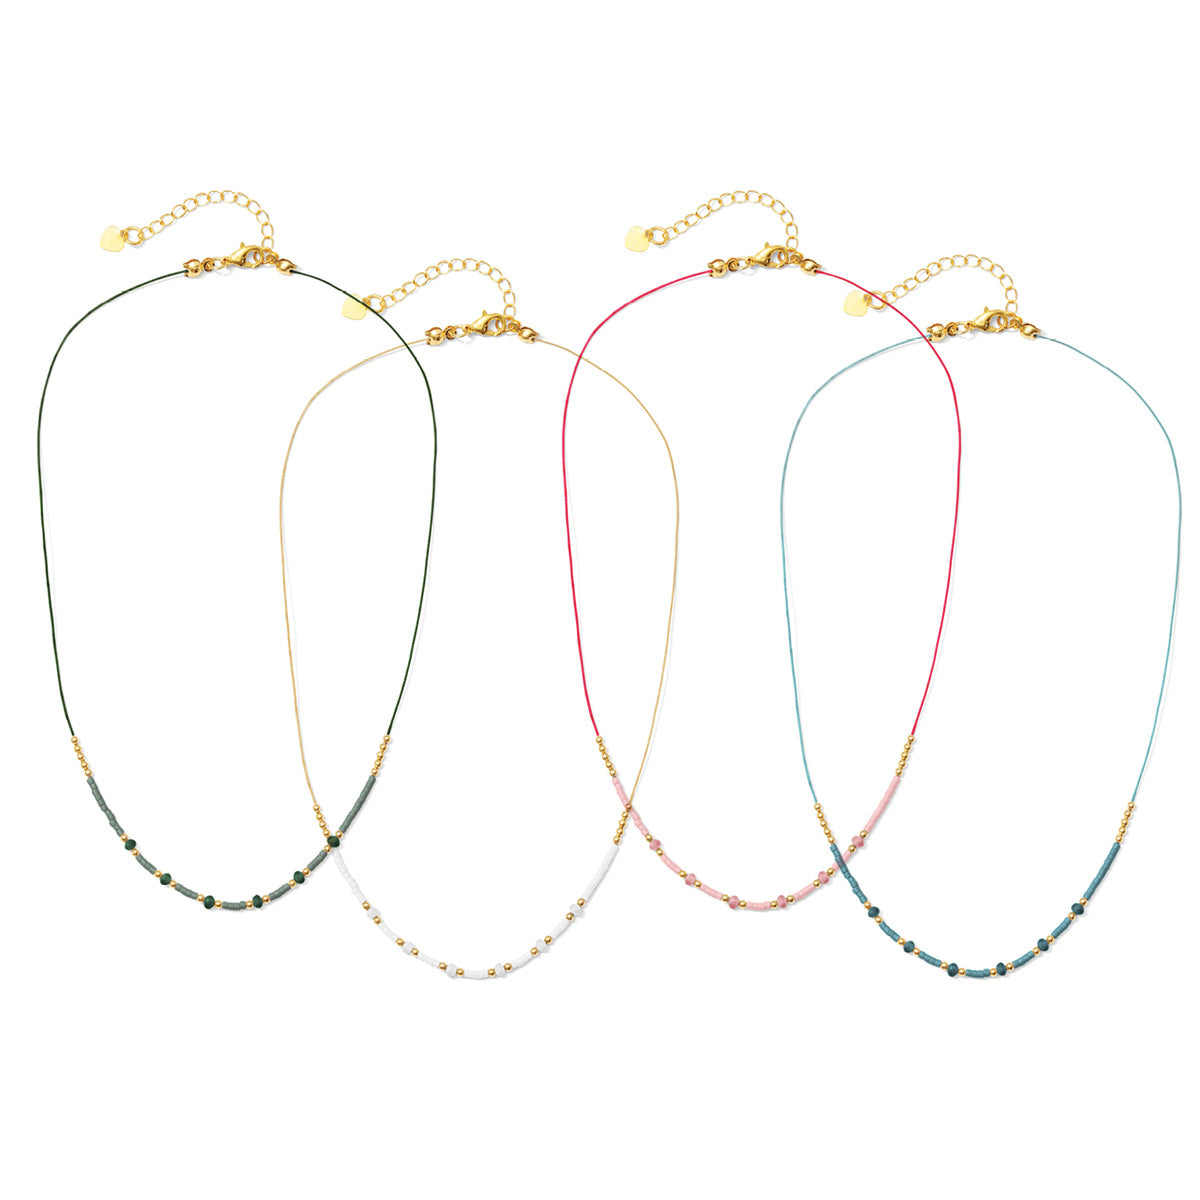 Set/12 colorful string necklace